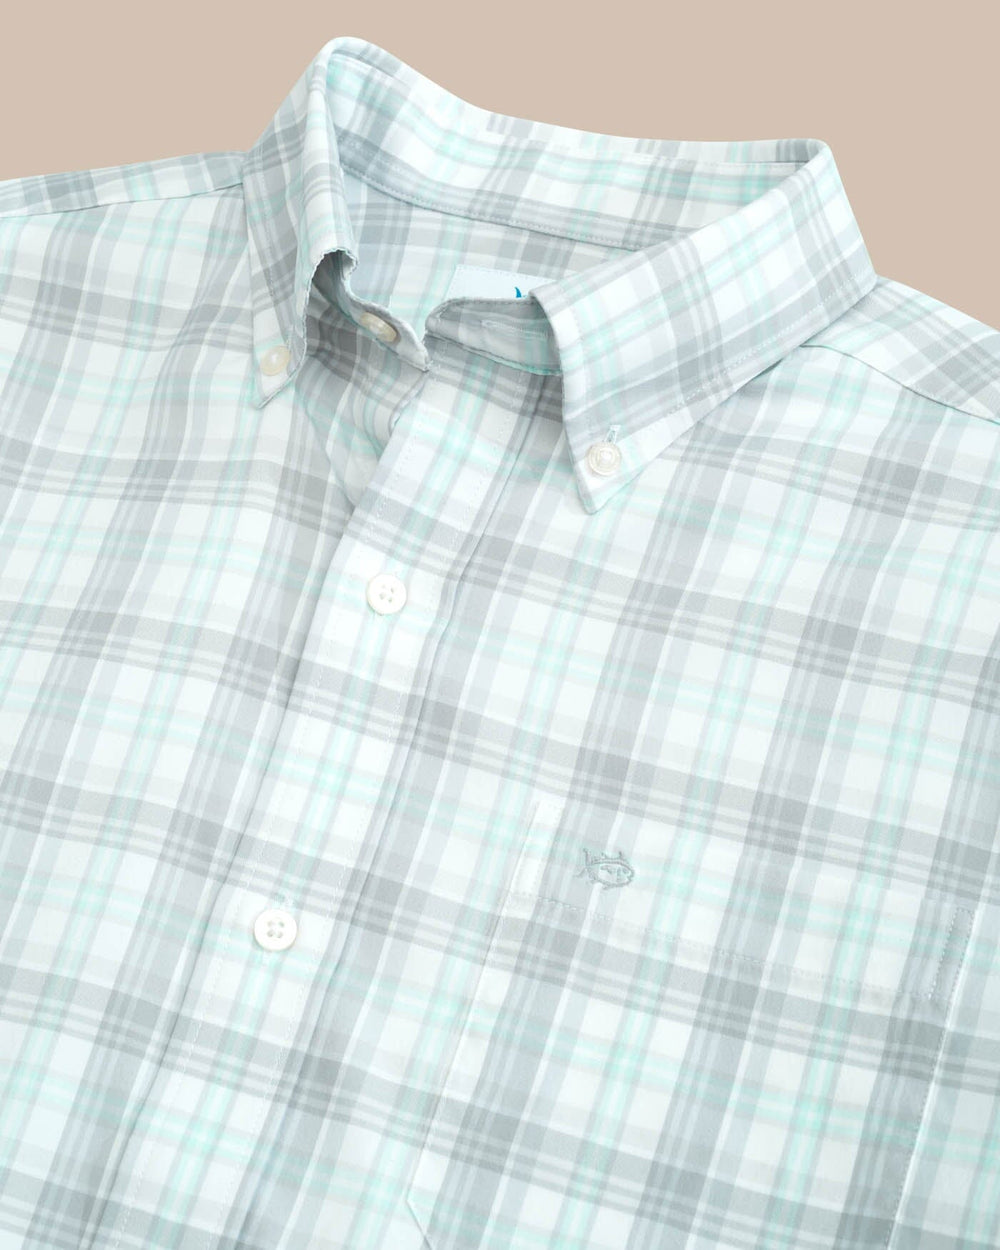 The detail view of the Southern Tide Intercoastal West End Plaid Long Sleeve Sport Shirt by Southern Tide - Platinum Grey